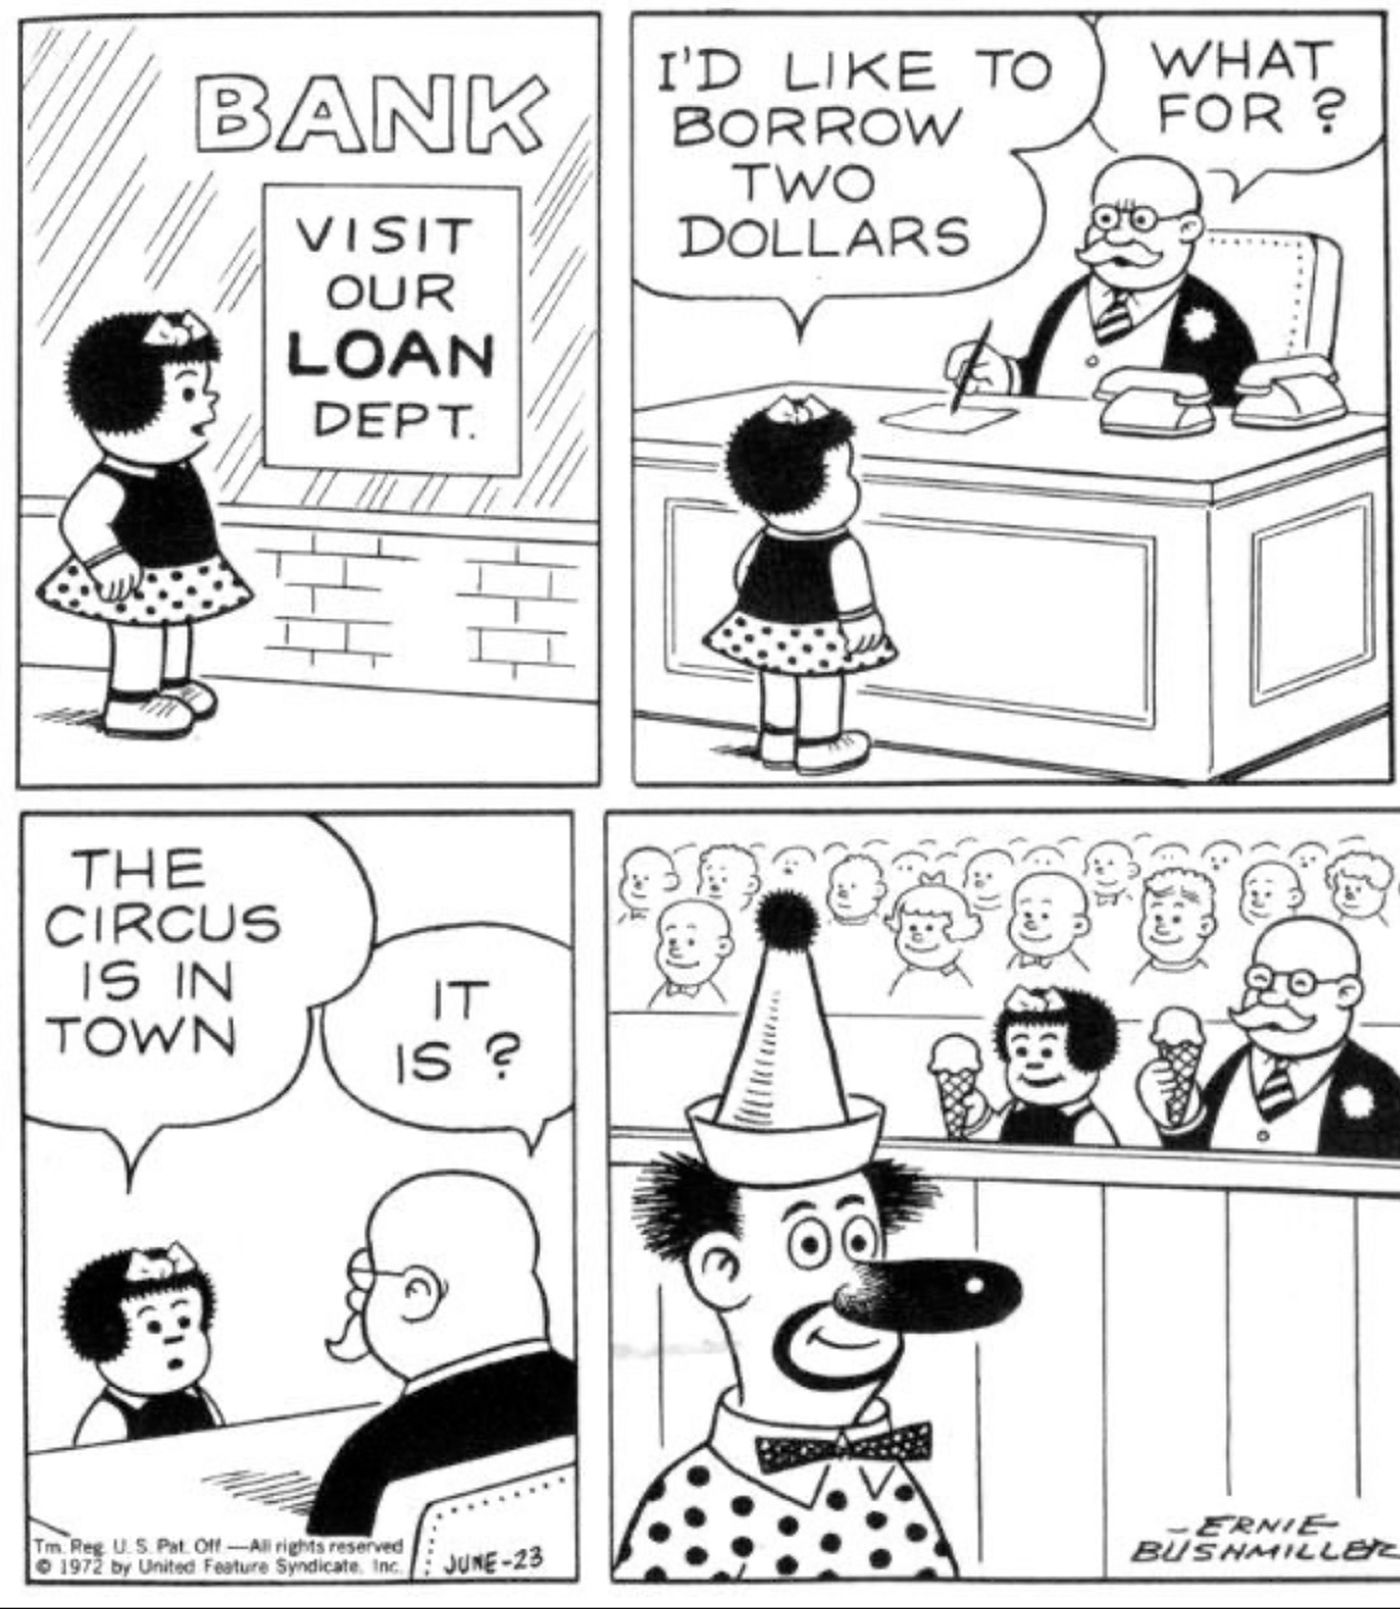 Nancy asks the bank for a loan because the circus is in town. The bank manager, surprised, goes with her, and they both get ice cream.